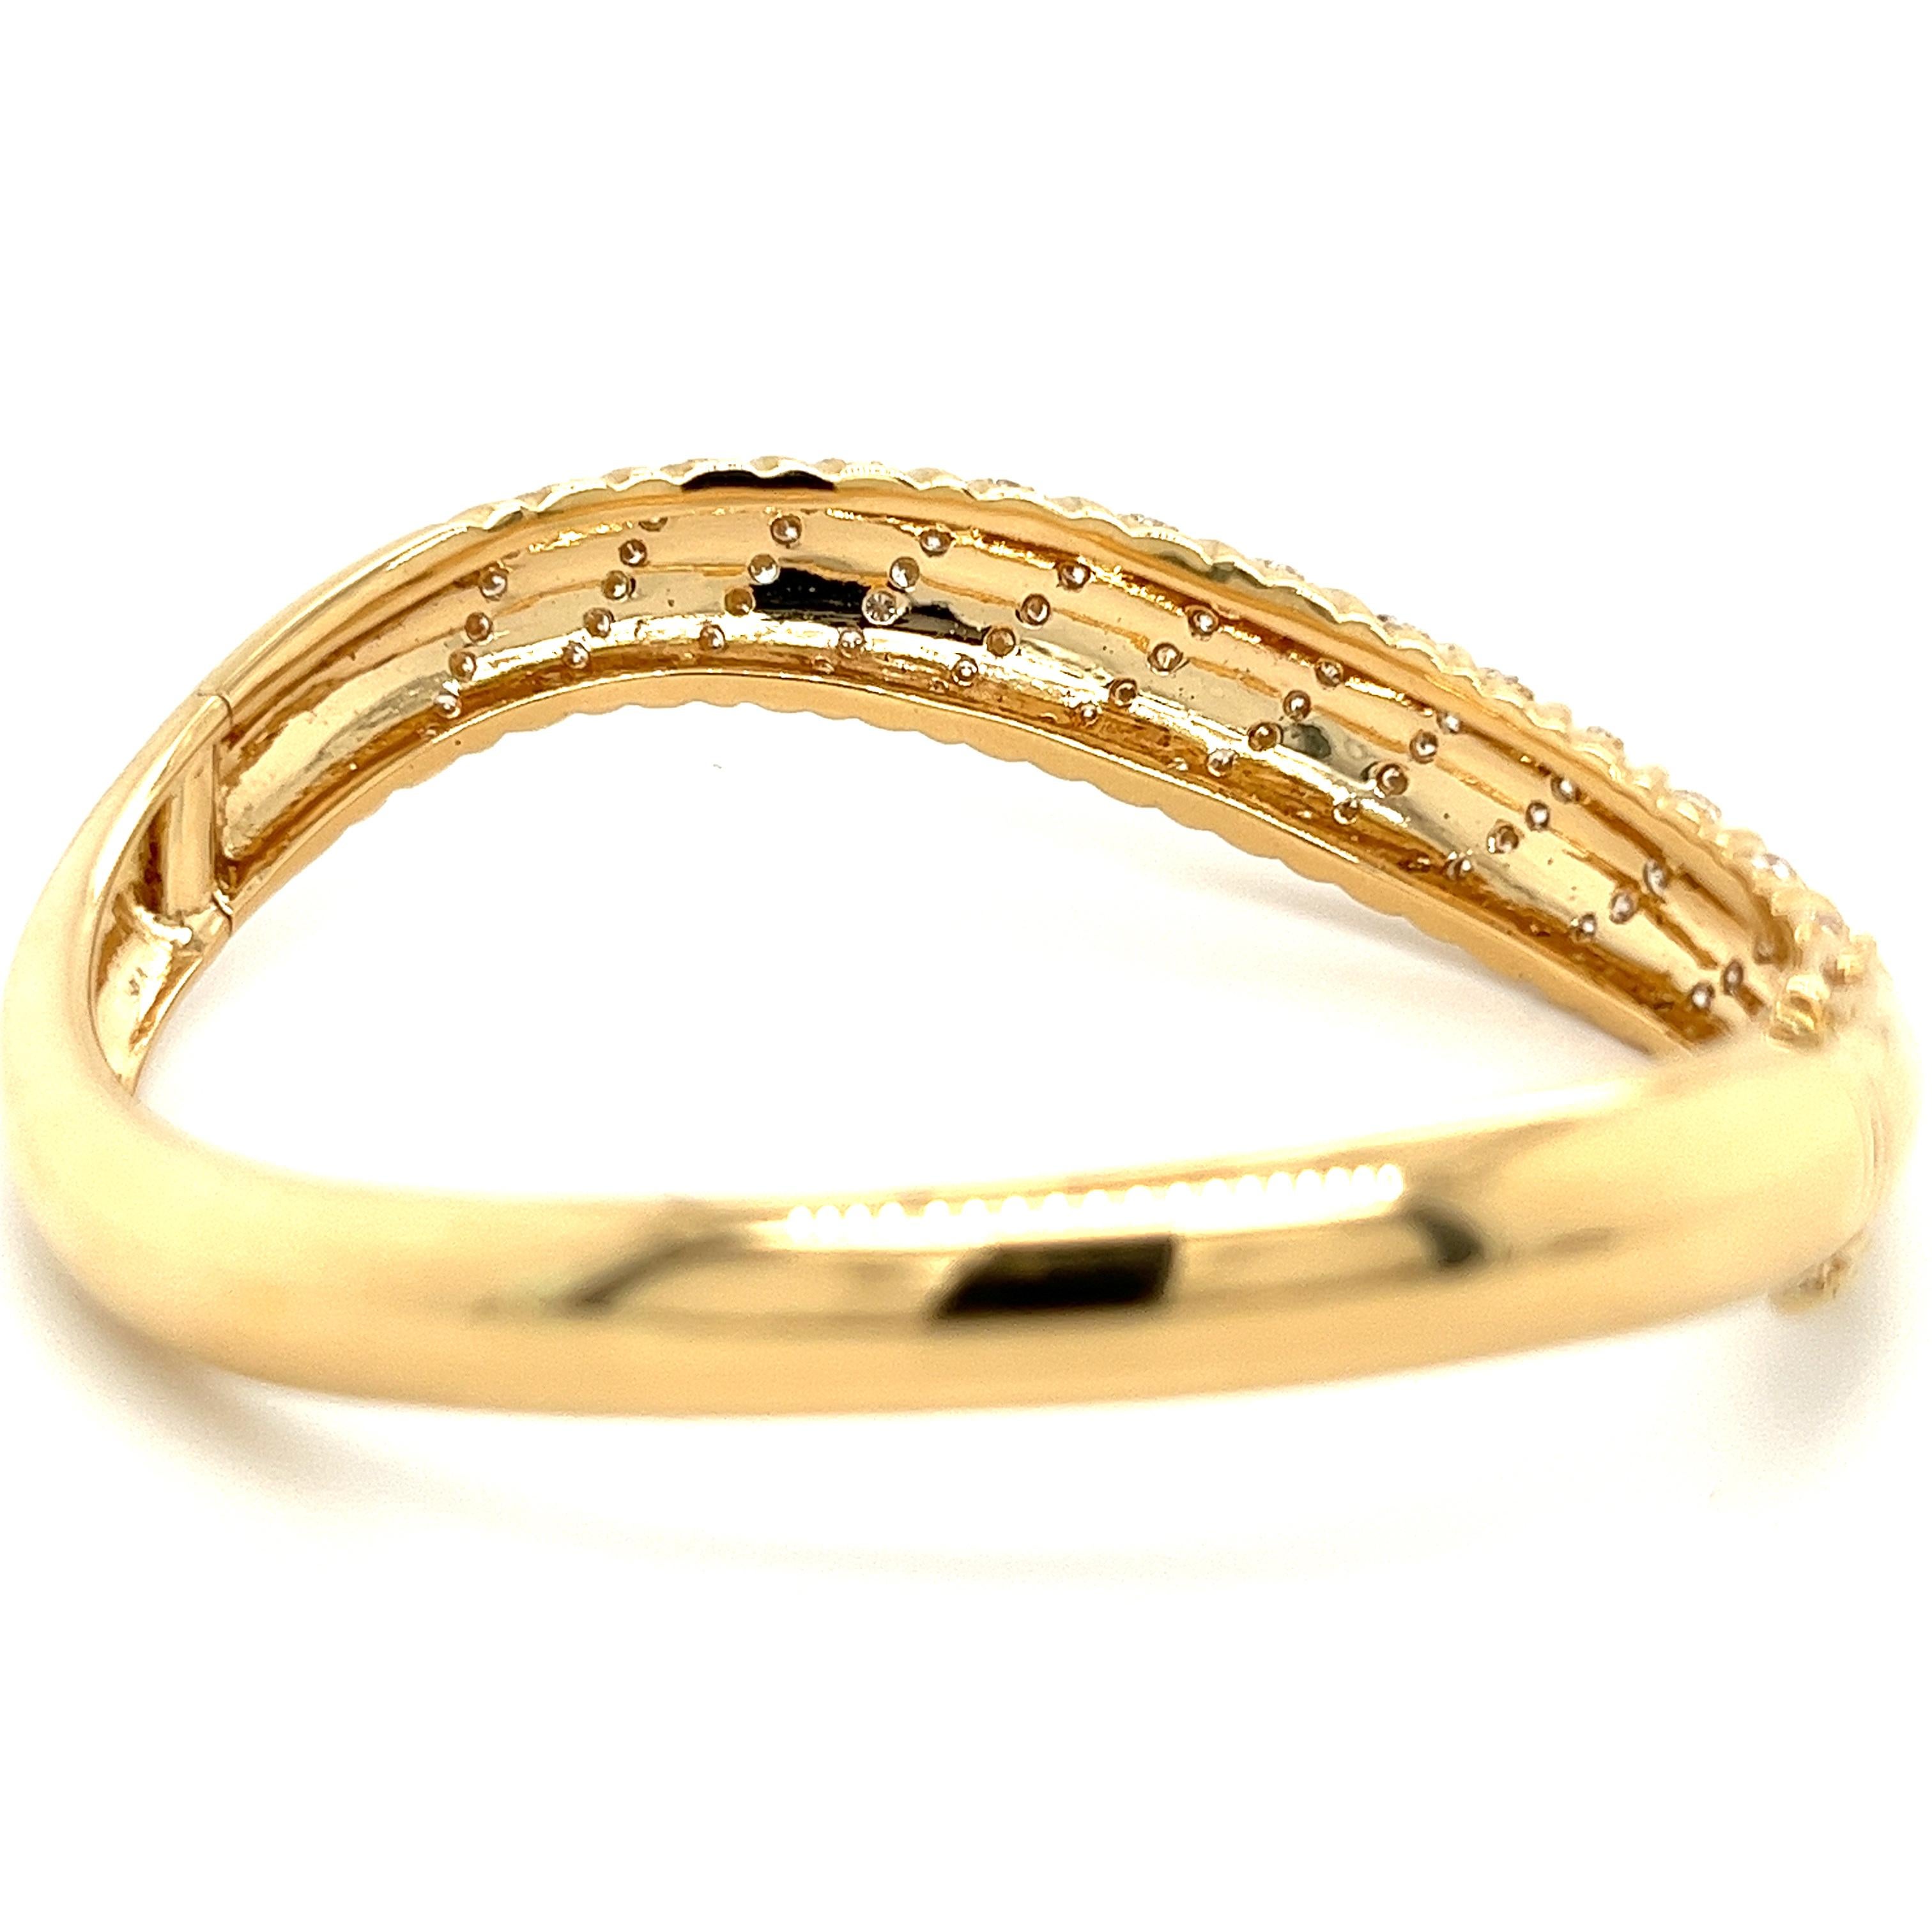 18 karat yellow gold bangle with 2.50 carats in round cut diamonds. Handmade with a wavy motif and textured gold. 

Details: 
✔ Metal: 18K 
✔ Diamond Carat: 2.50 (approx.)
✔ Diamond Quality: Excellent cut, E-F color, VS1-VS2 clarity 
✔ Size: 11.3mm